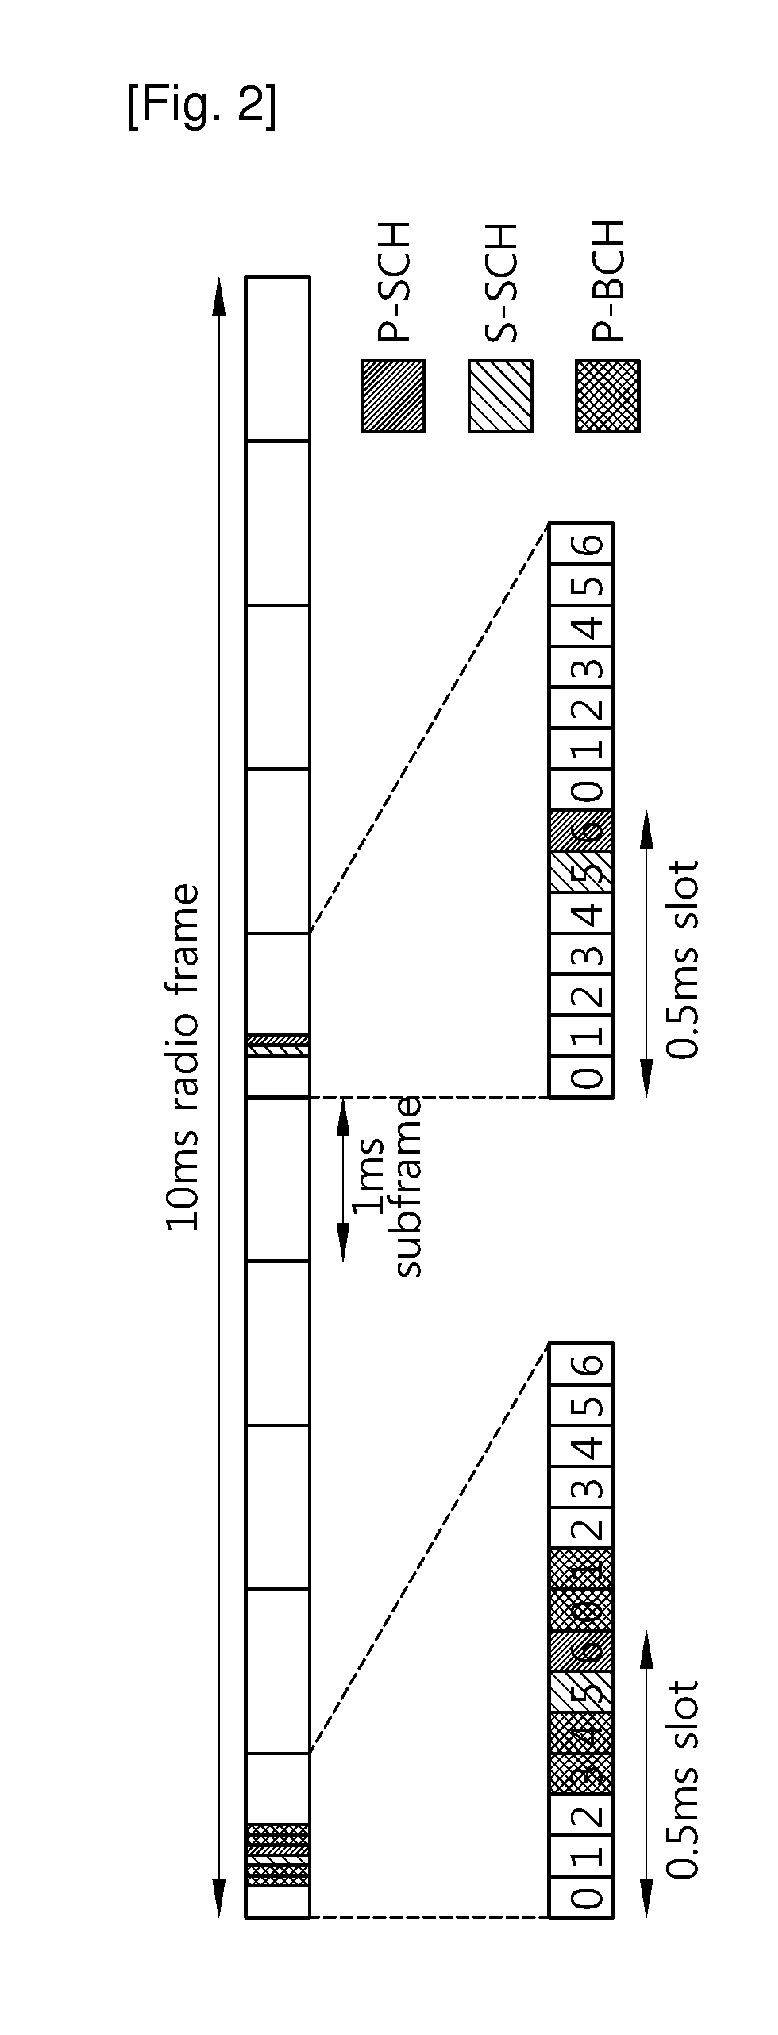 Method for performing cell search procedure in wireless communication system